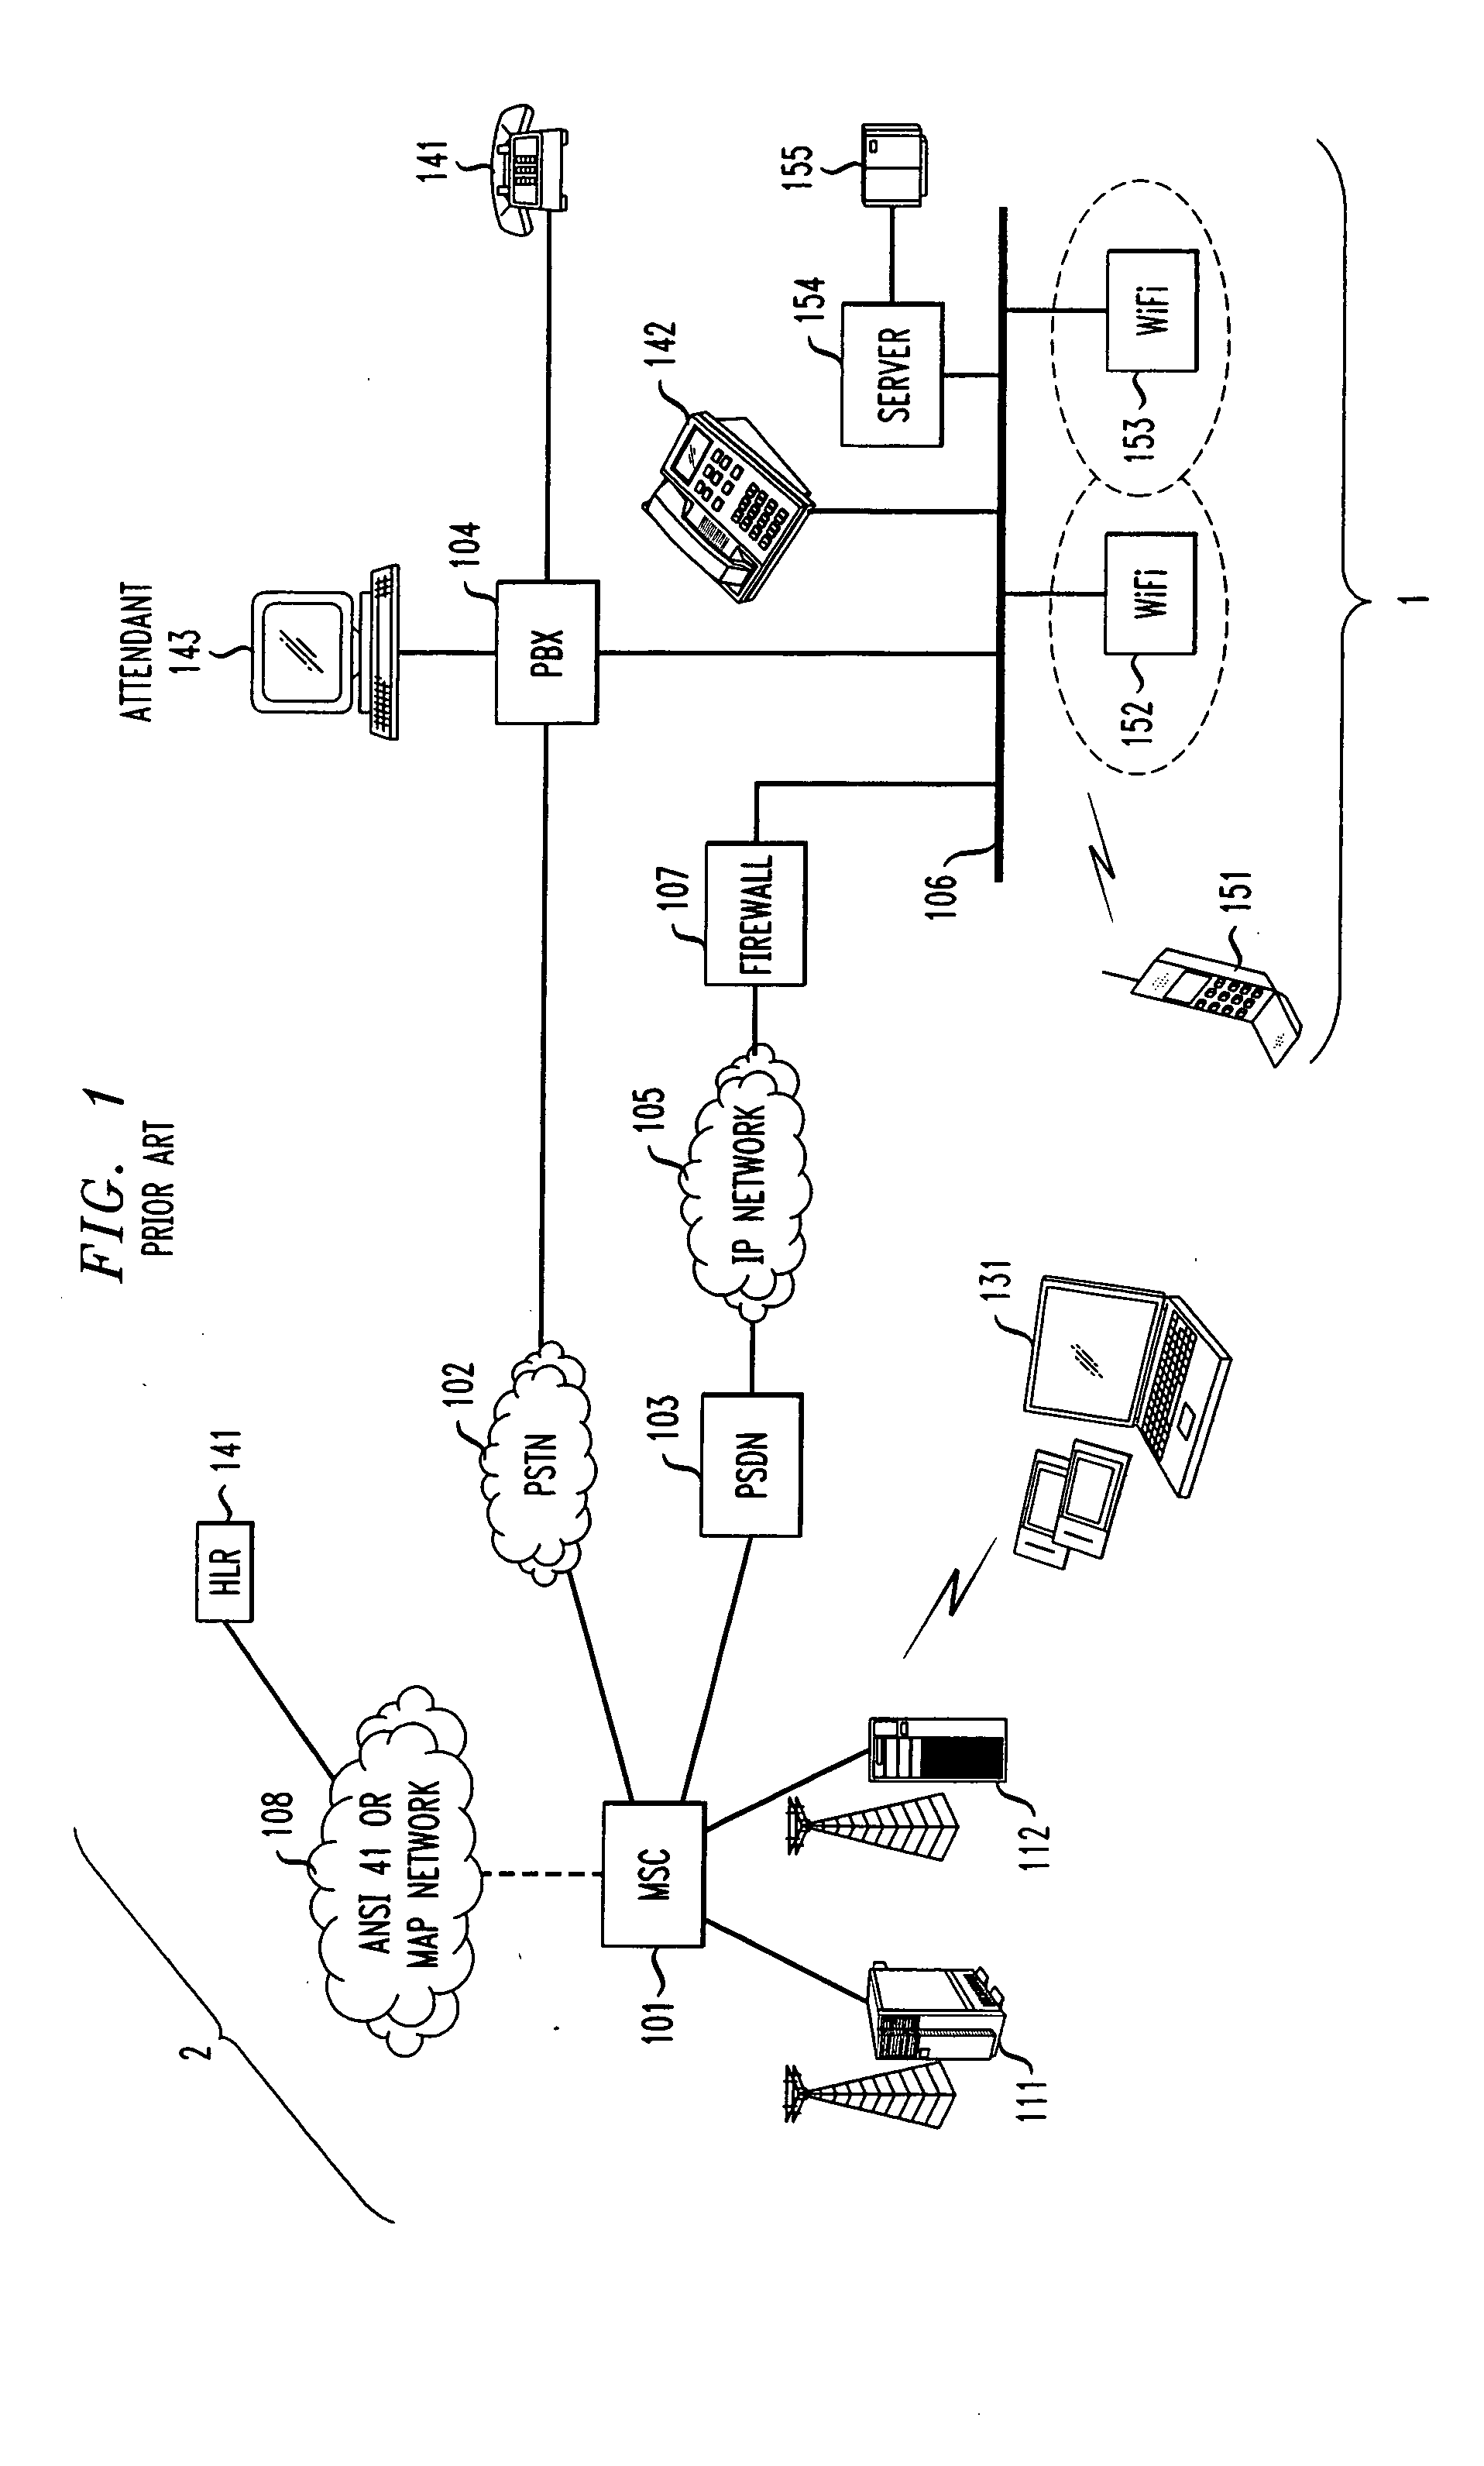 System for providing interoperability of a proprietary enterprise communication network with a cellular communication network